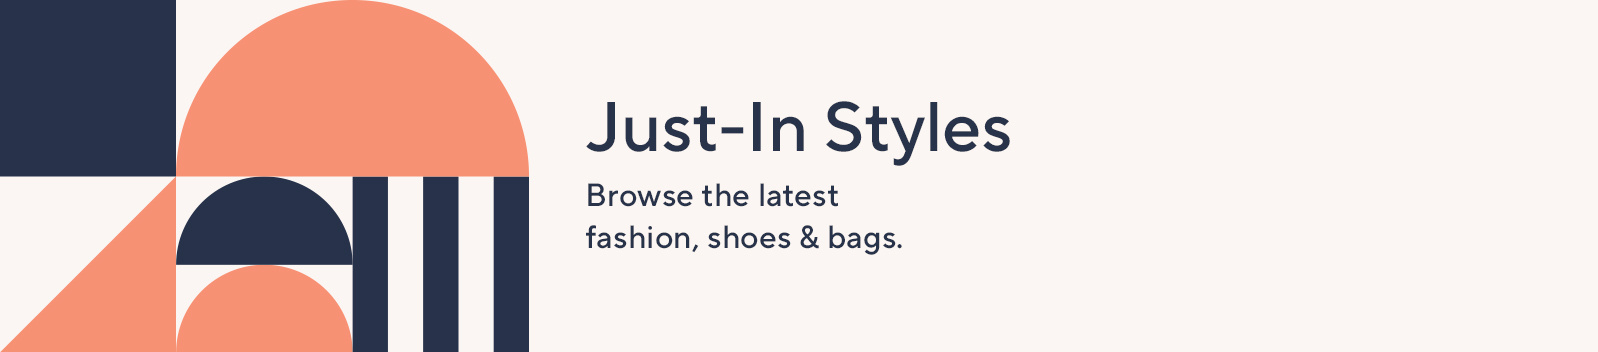 Just-In Styles: Browse the latest fashion, shoes & bags.